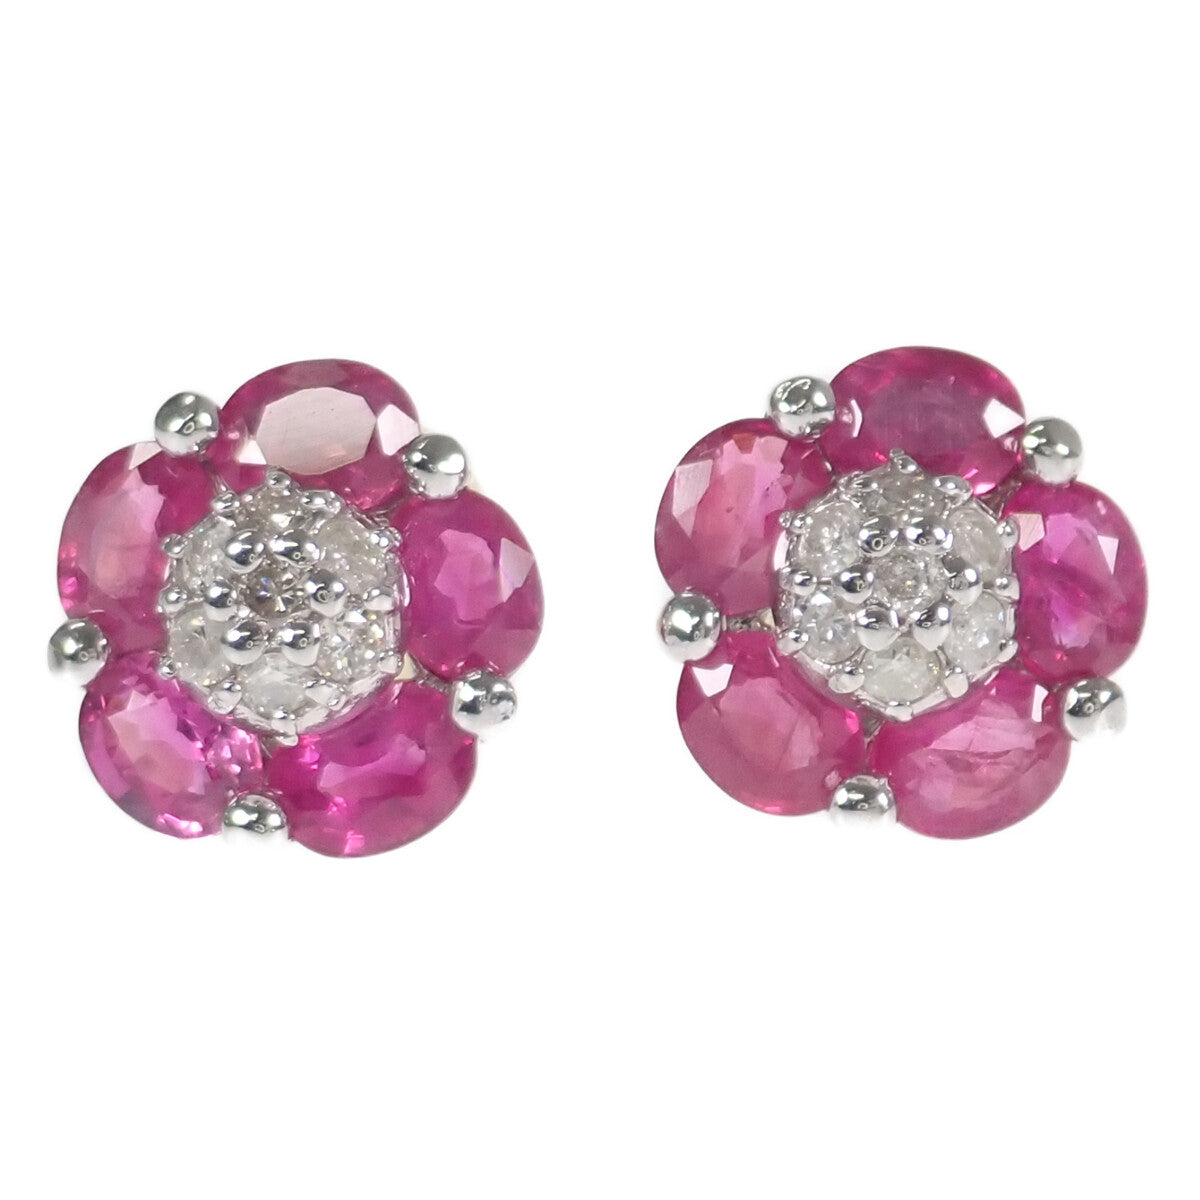 Women's 1.06ct Ruby and 0.10ct Diamond Floral Design Earrings in K18 White Gold, Pink, Pre-owned